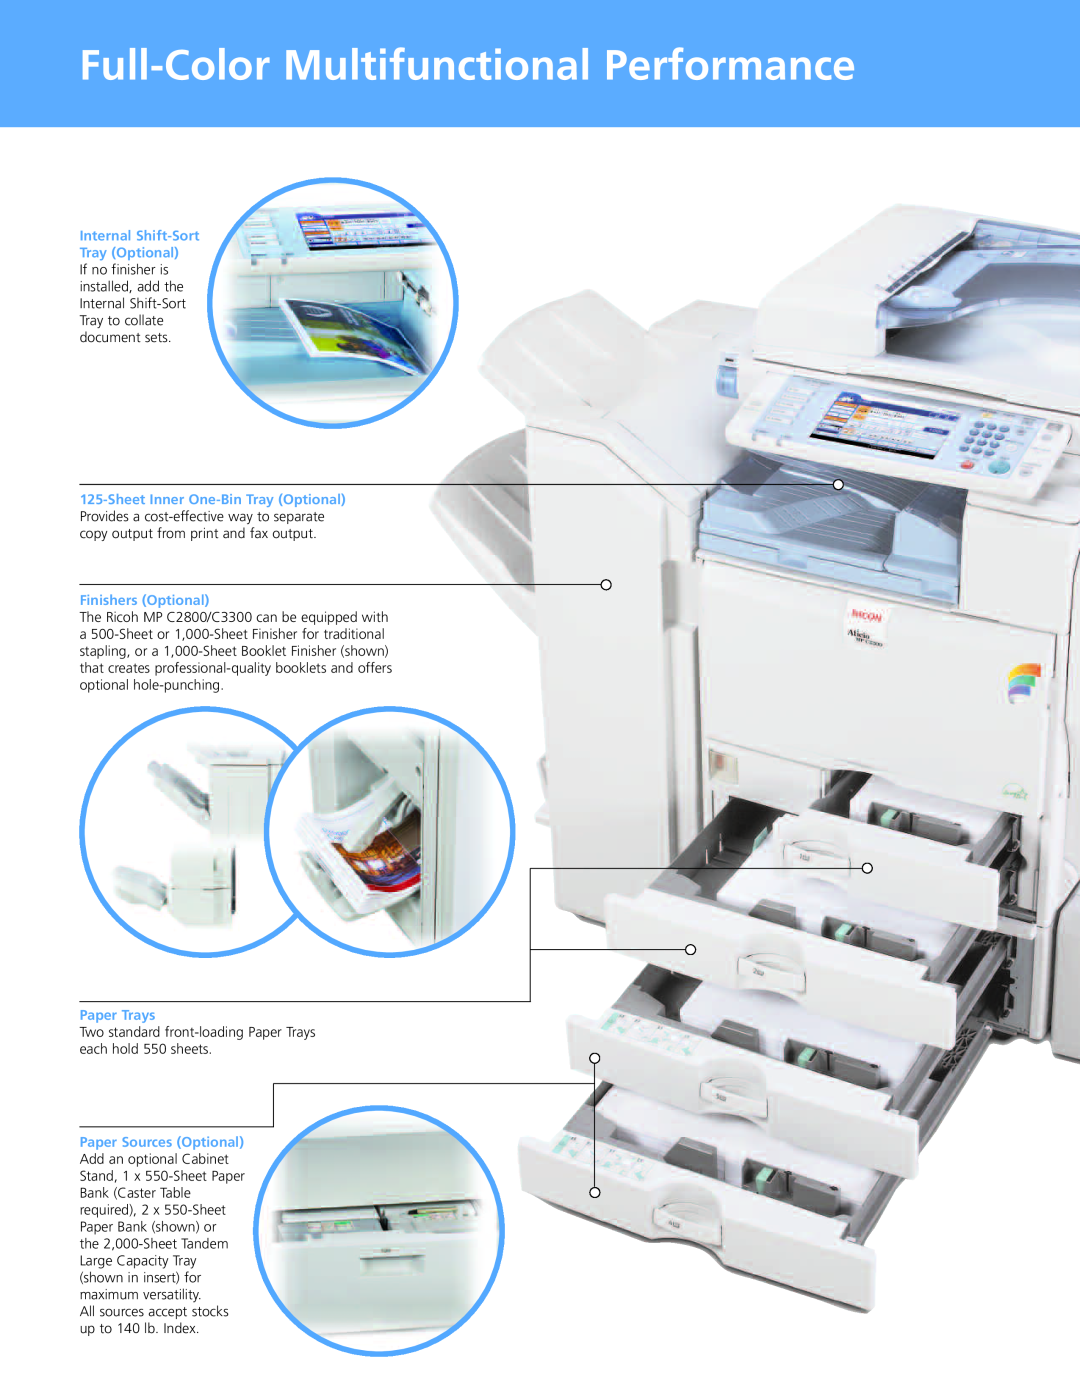 Ricoh MP C3300 Full-Color Multifunctional Performance, Internal Shift-Sort Tray Optional, Finishers Optional, Paper Trays 